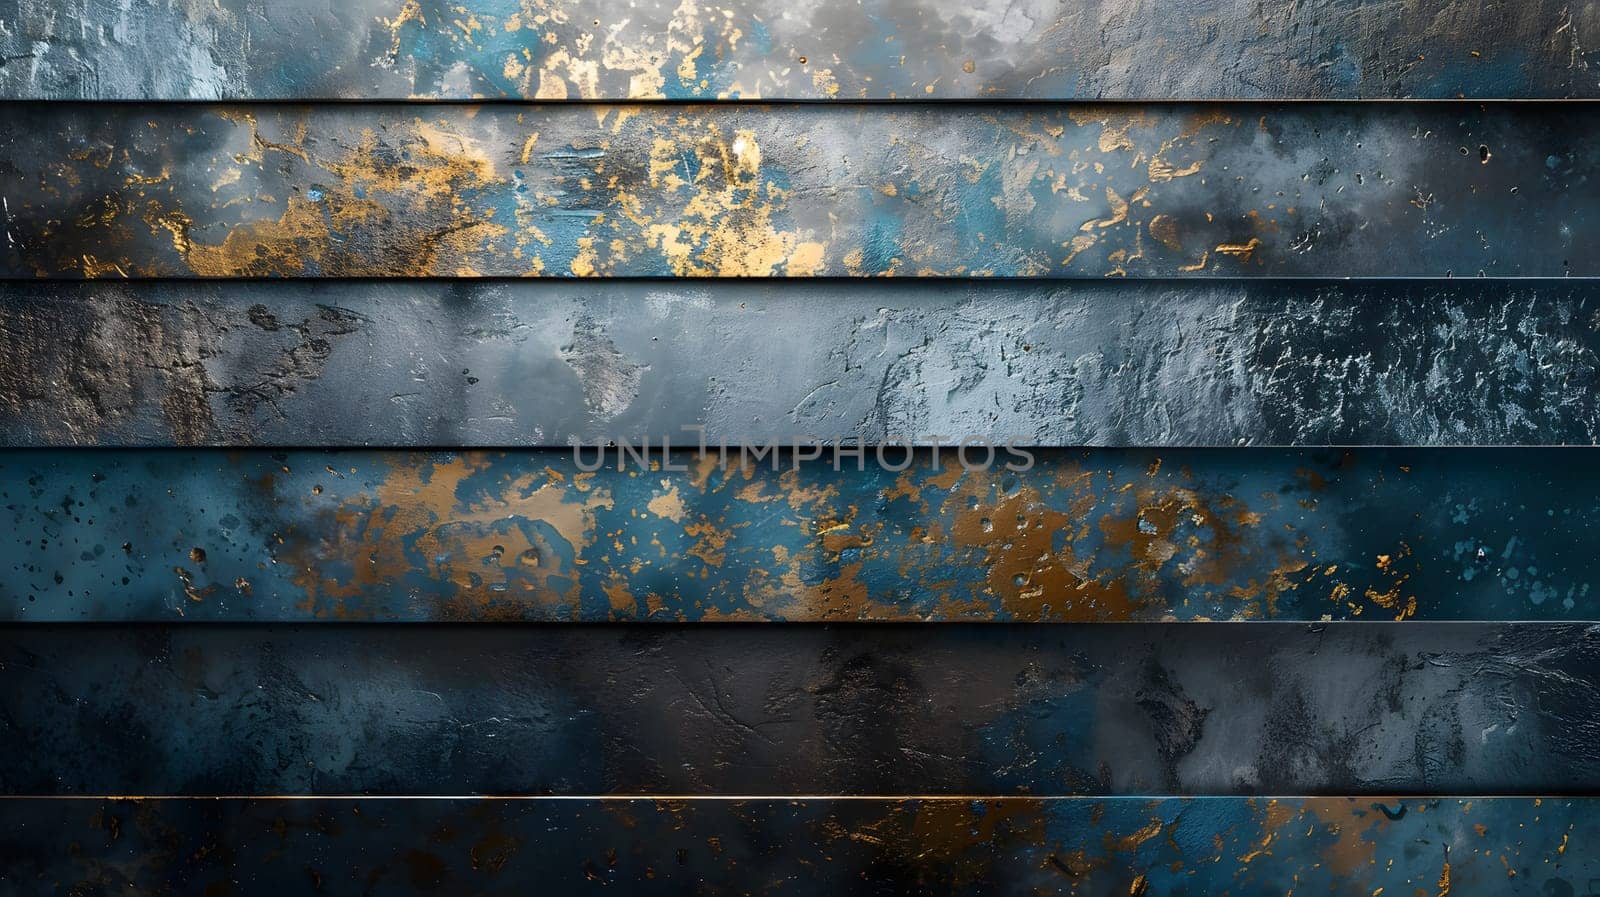 A detailed shot of a woodpaneled wall with electric blue and gold stripes by Nadtochiy